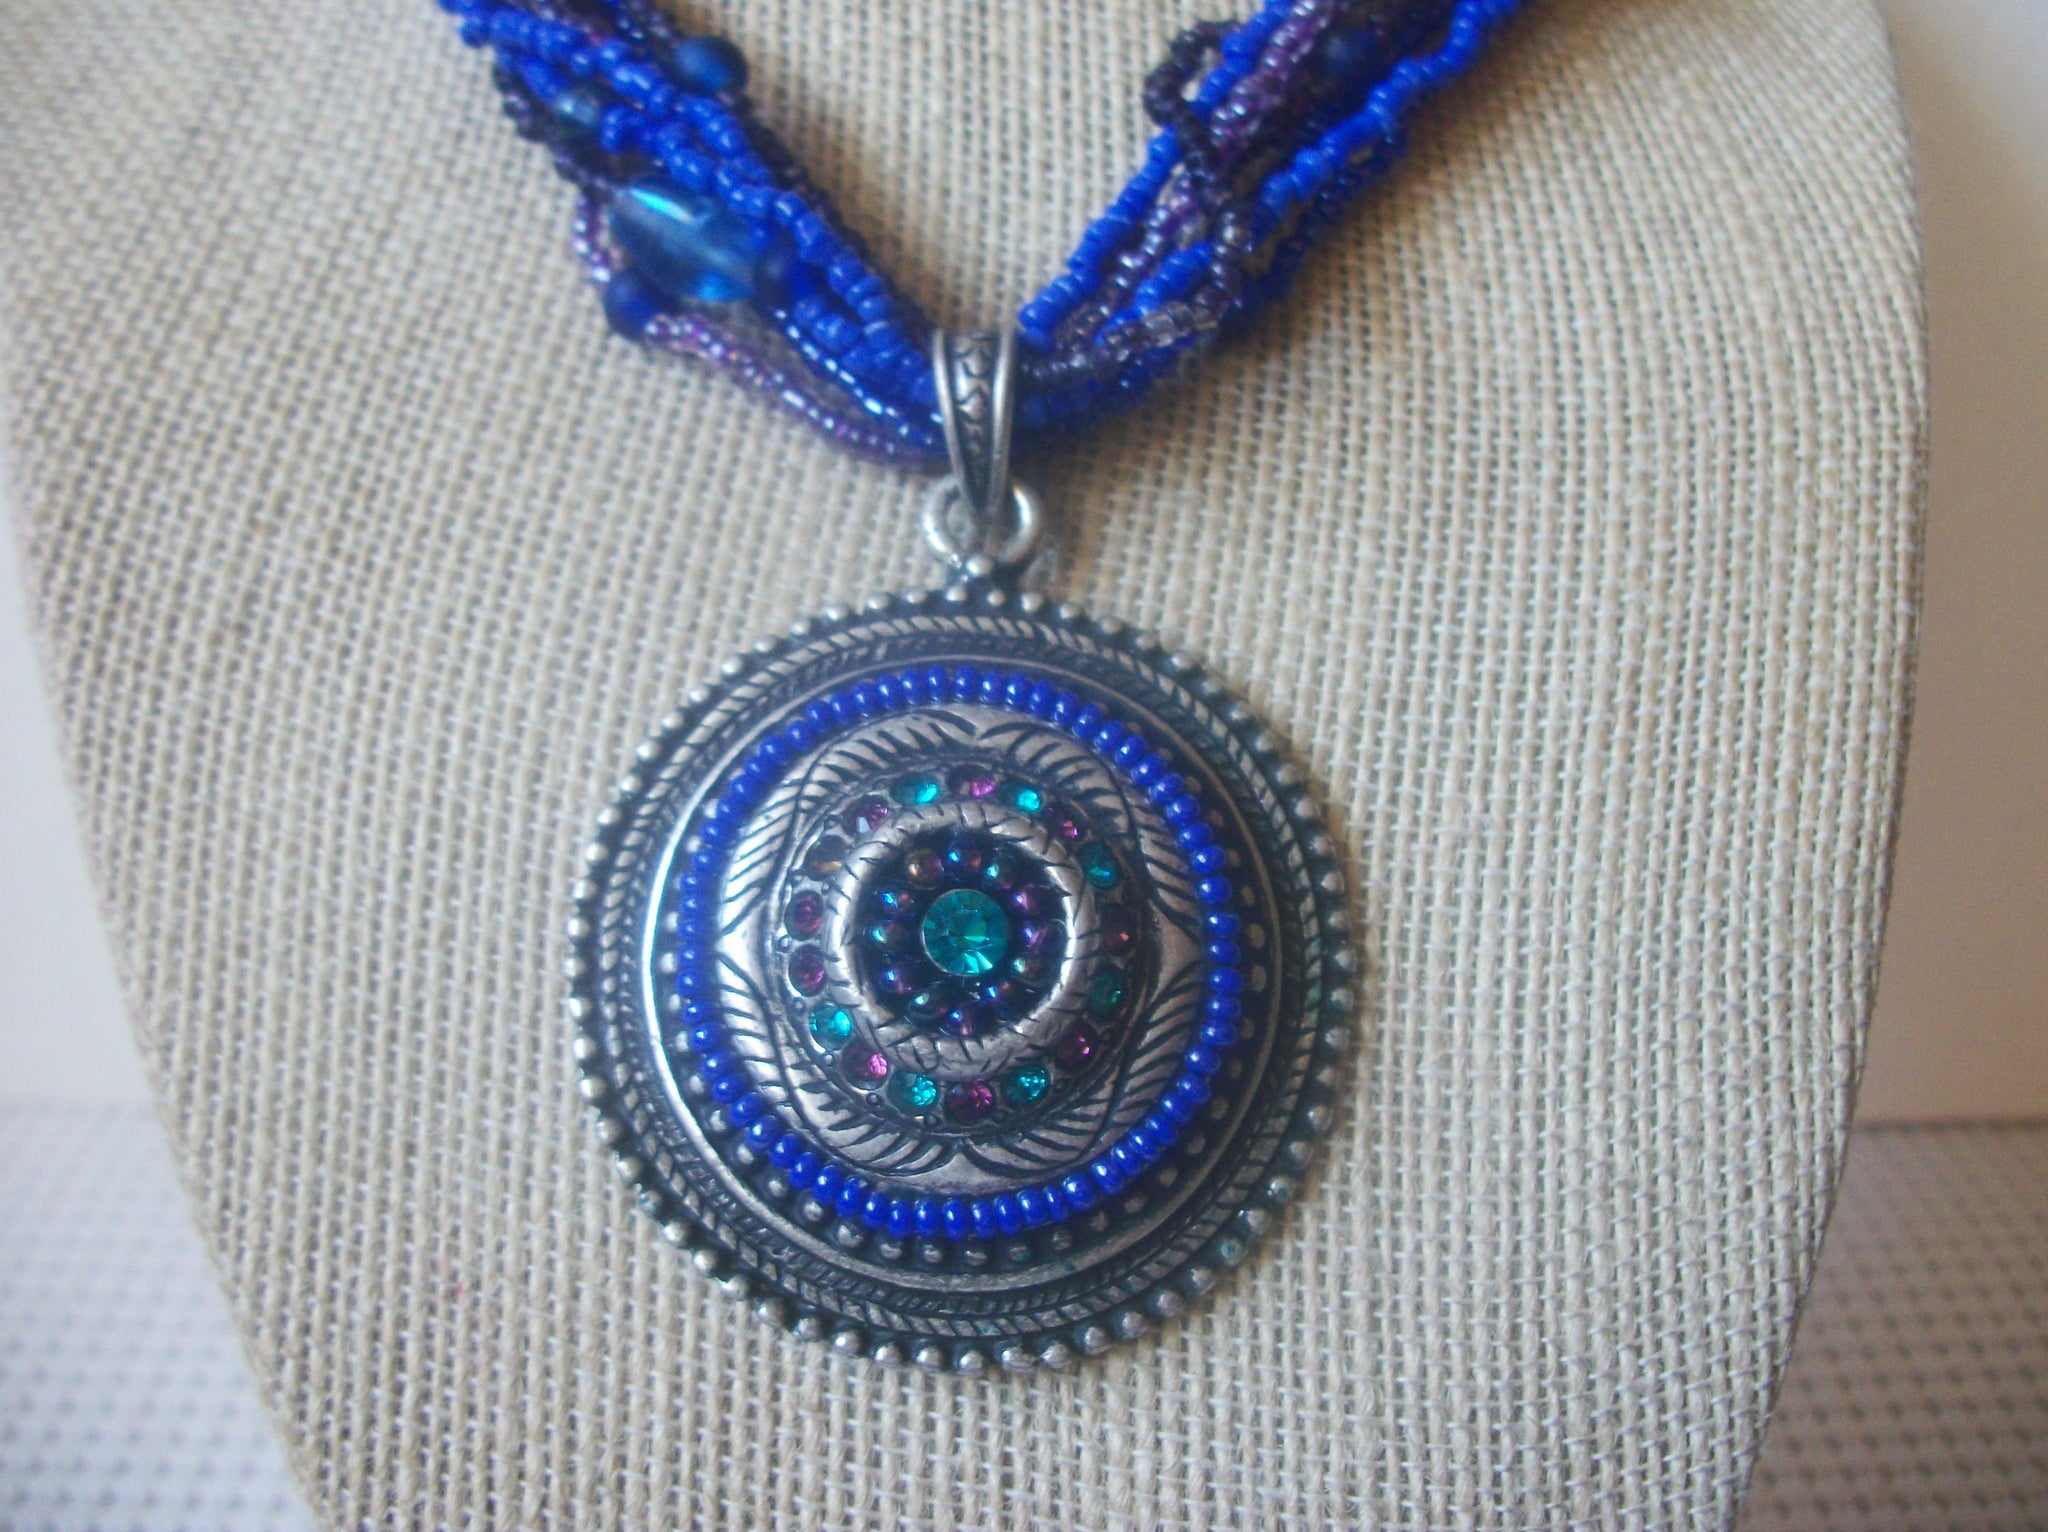 Vintage Jewelry, Signed CHICO`s, Colorful Cobalt Blue, Lilac, Southwestern Pendant Rhinestones, Silver Tone, Necklace 53018